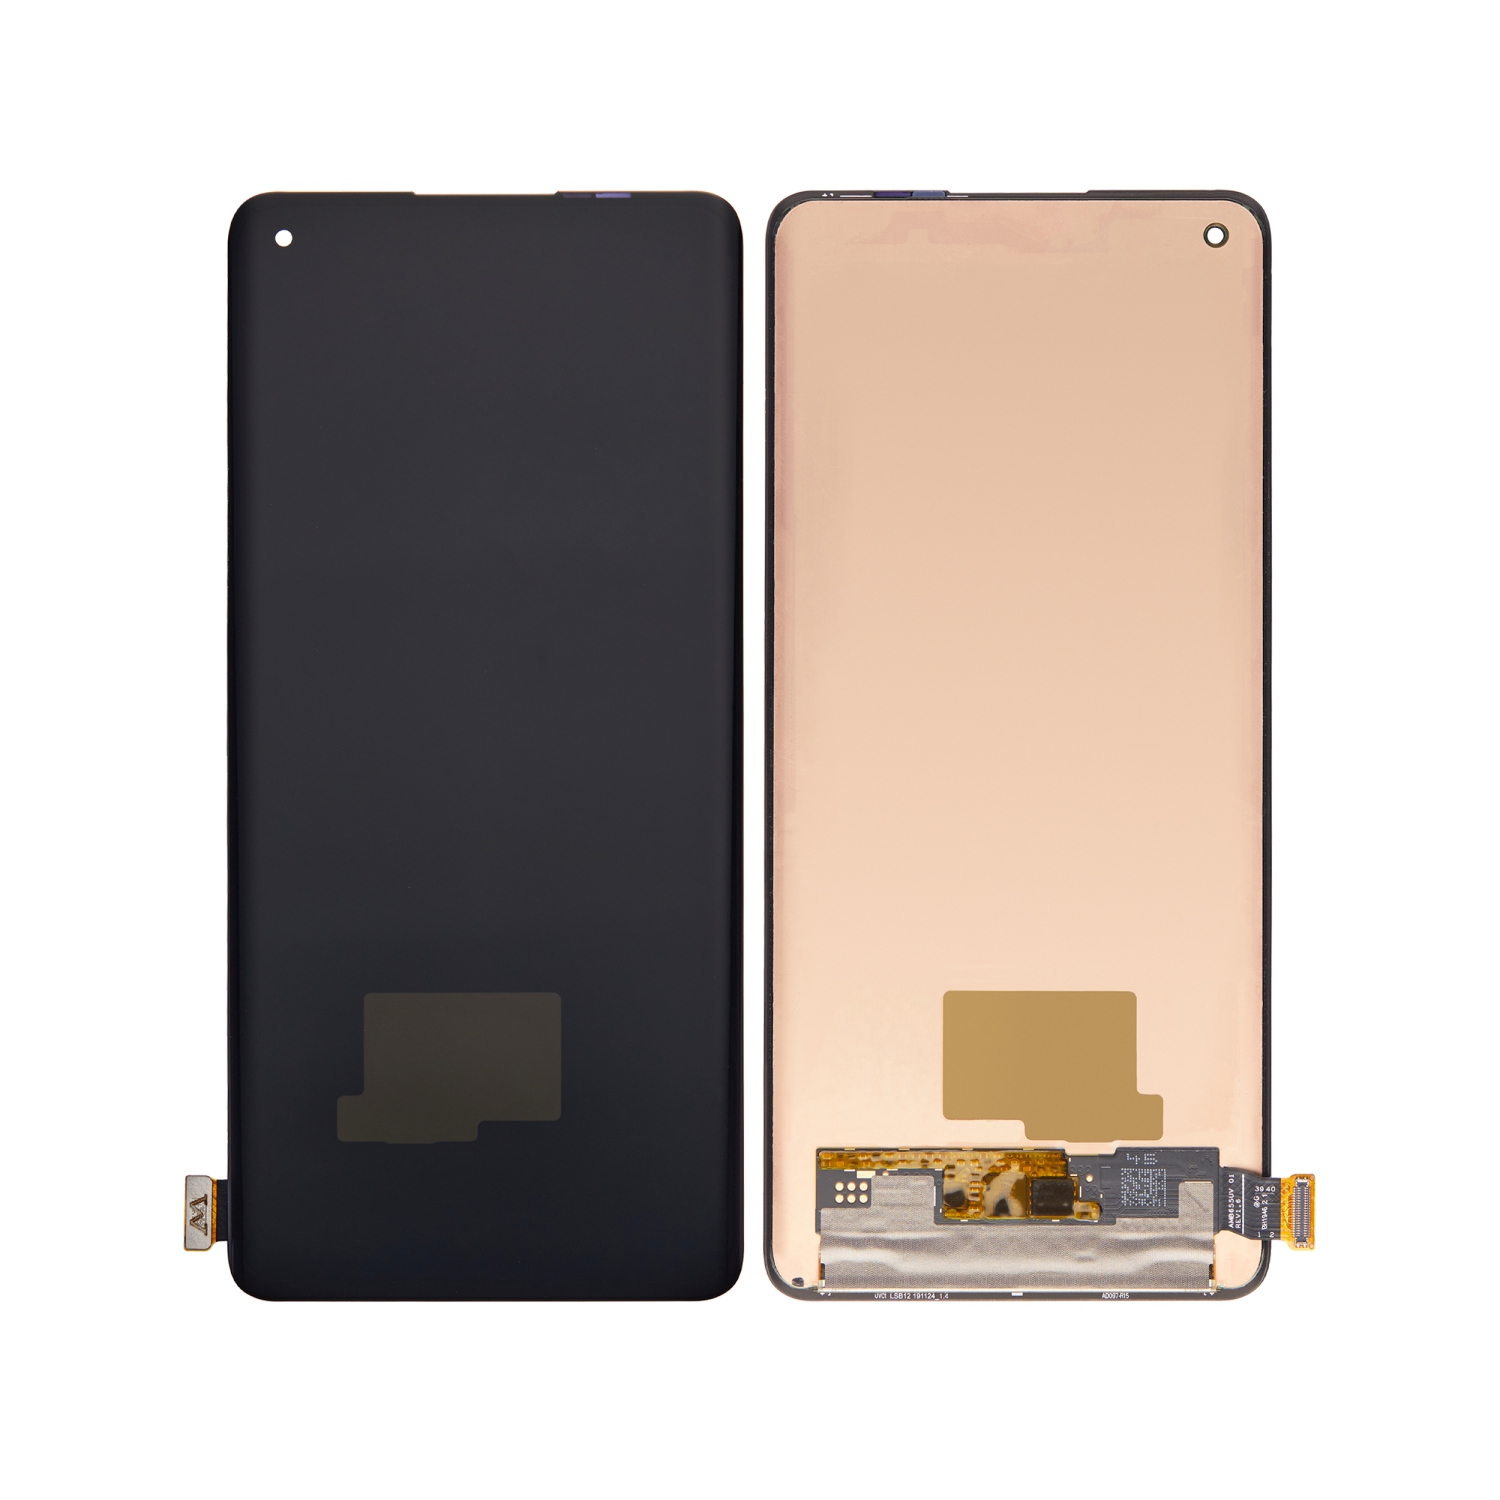 Refurbished (Excellent) - Replacement OLED Assembly Without Frame Compatible For OnePlus 8 / 5G / OPPO Reno 3 Pro 5G / OPPO Reno 4 Pro / OPPO Find X2 Neo (All Colors)